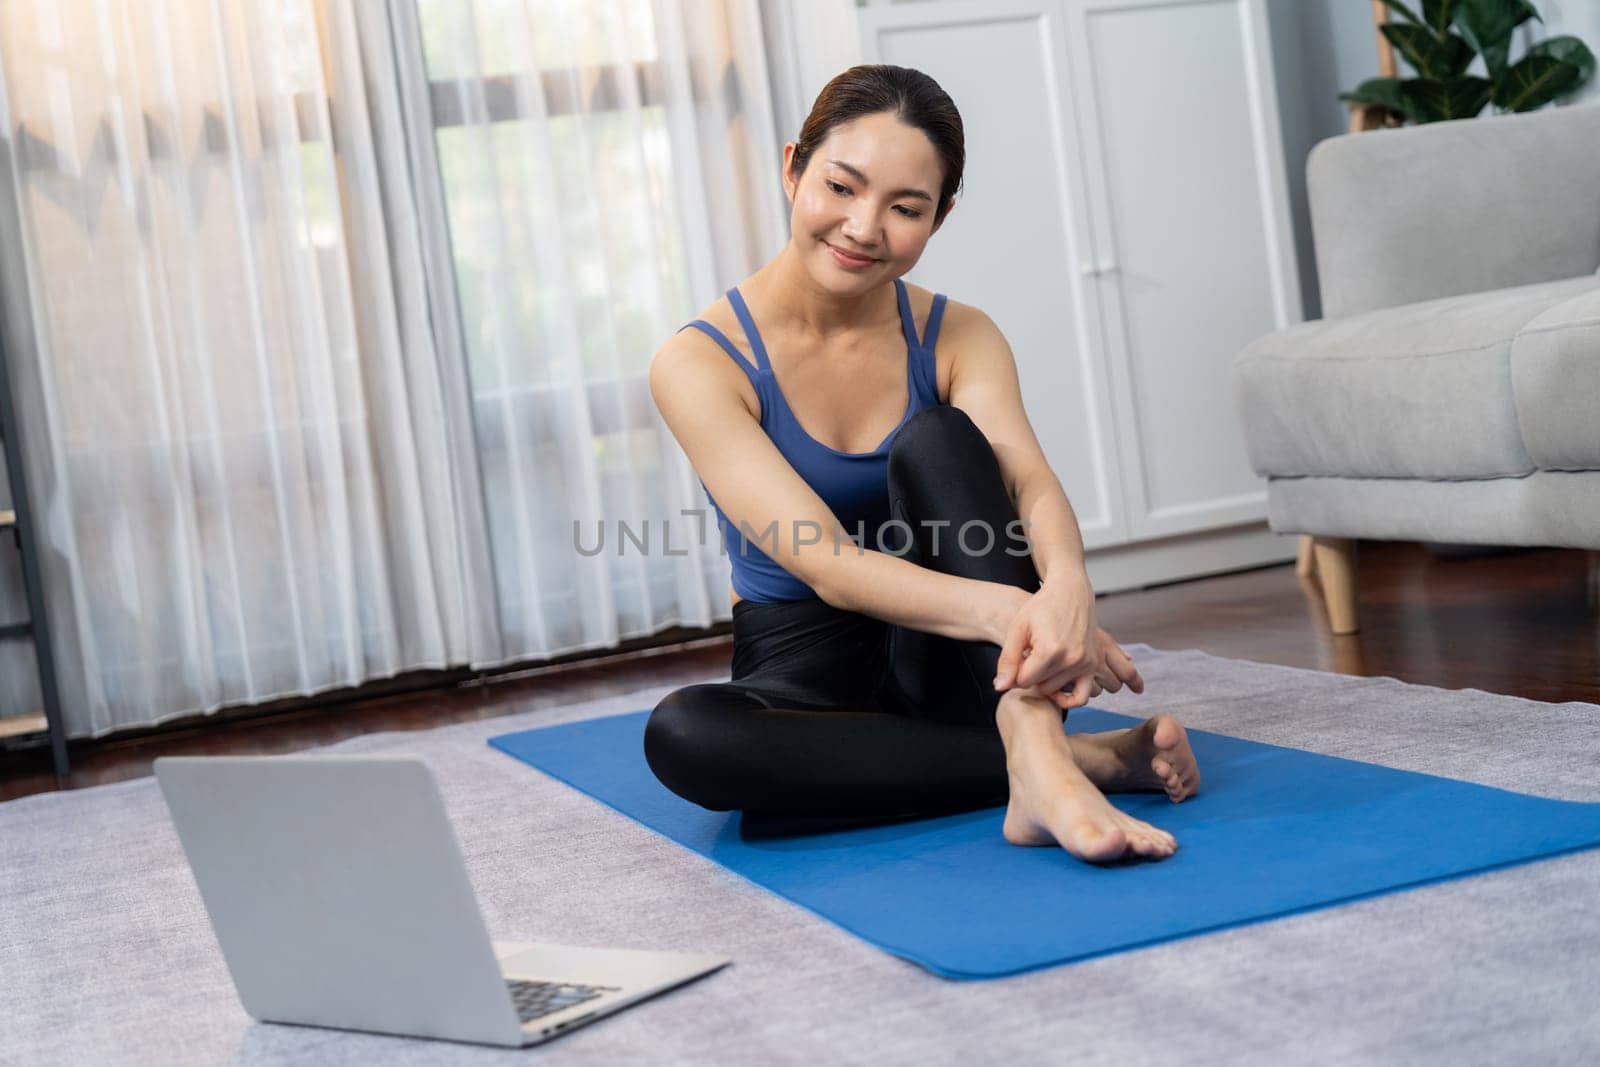 Asian woman in sportswear sitting on the house floor while watching online exercise training video on laptop. Attractive girl engage in her pursuit of healthy lifestyle. Vigorous